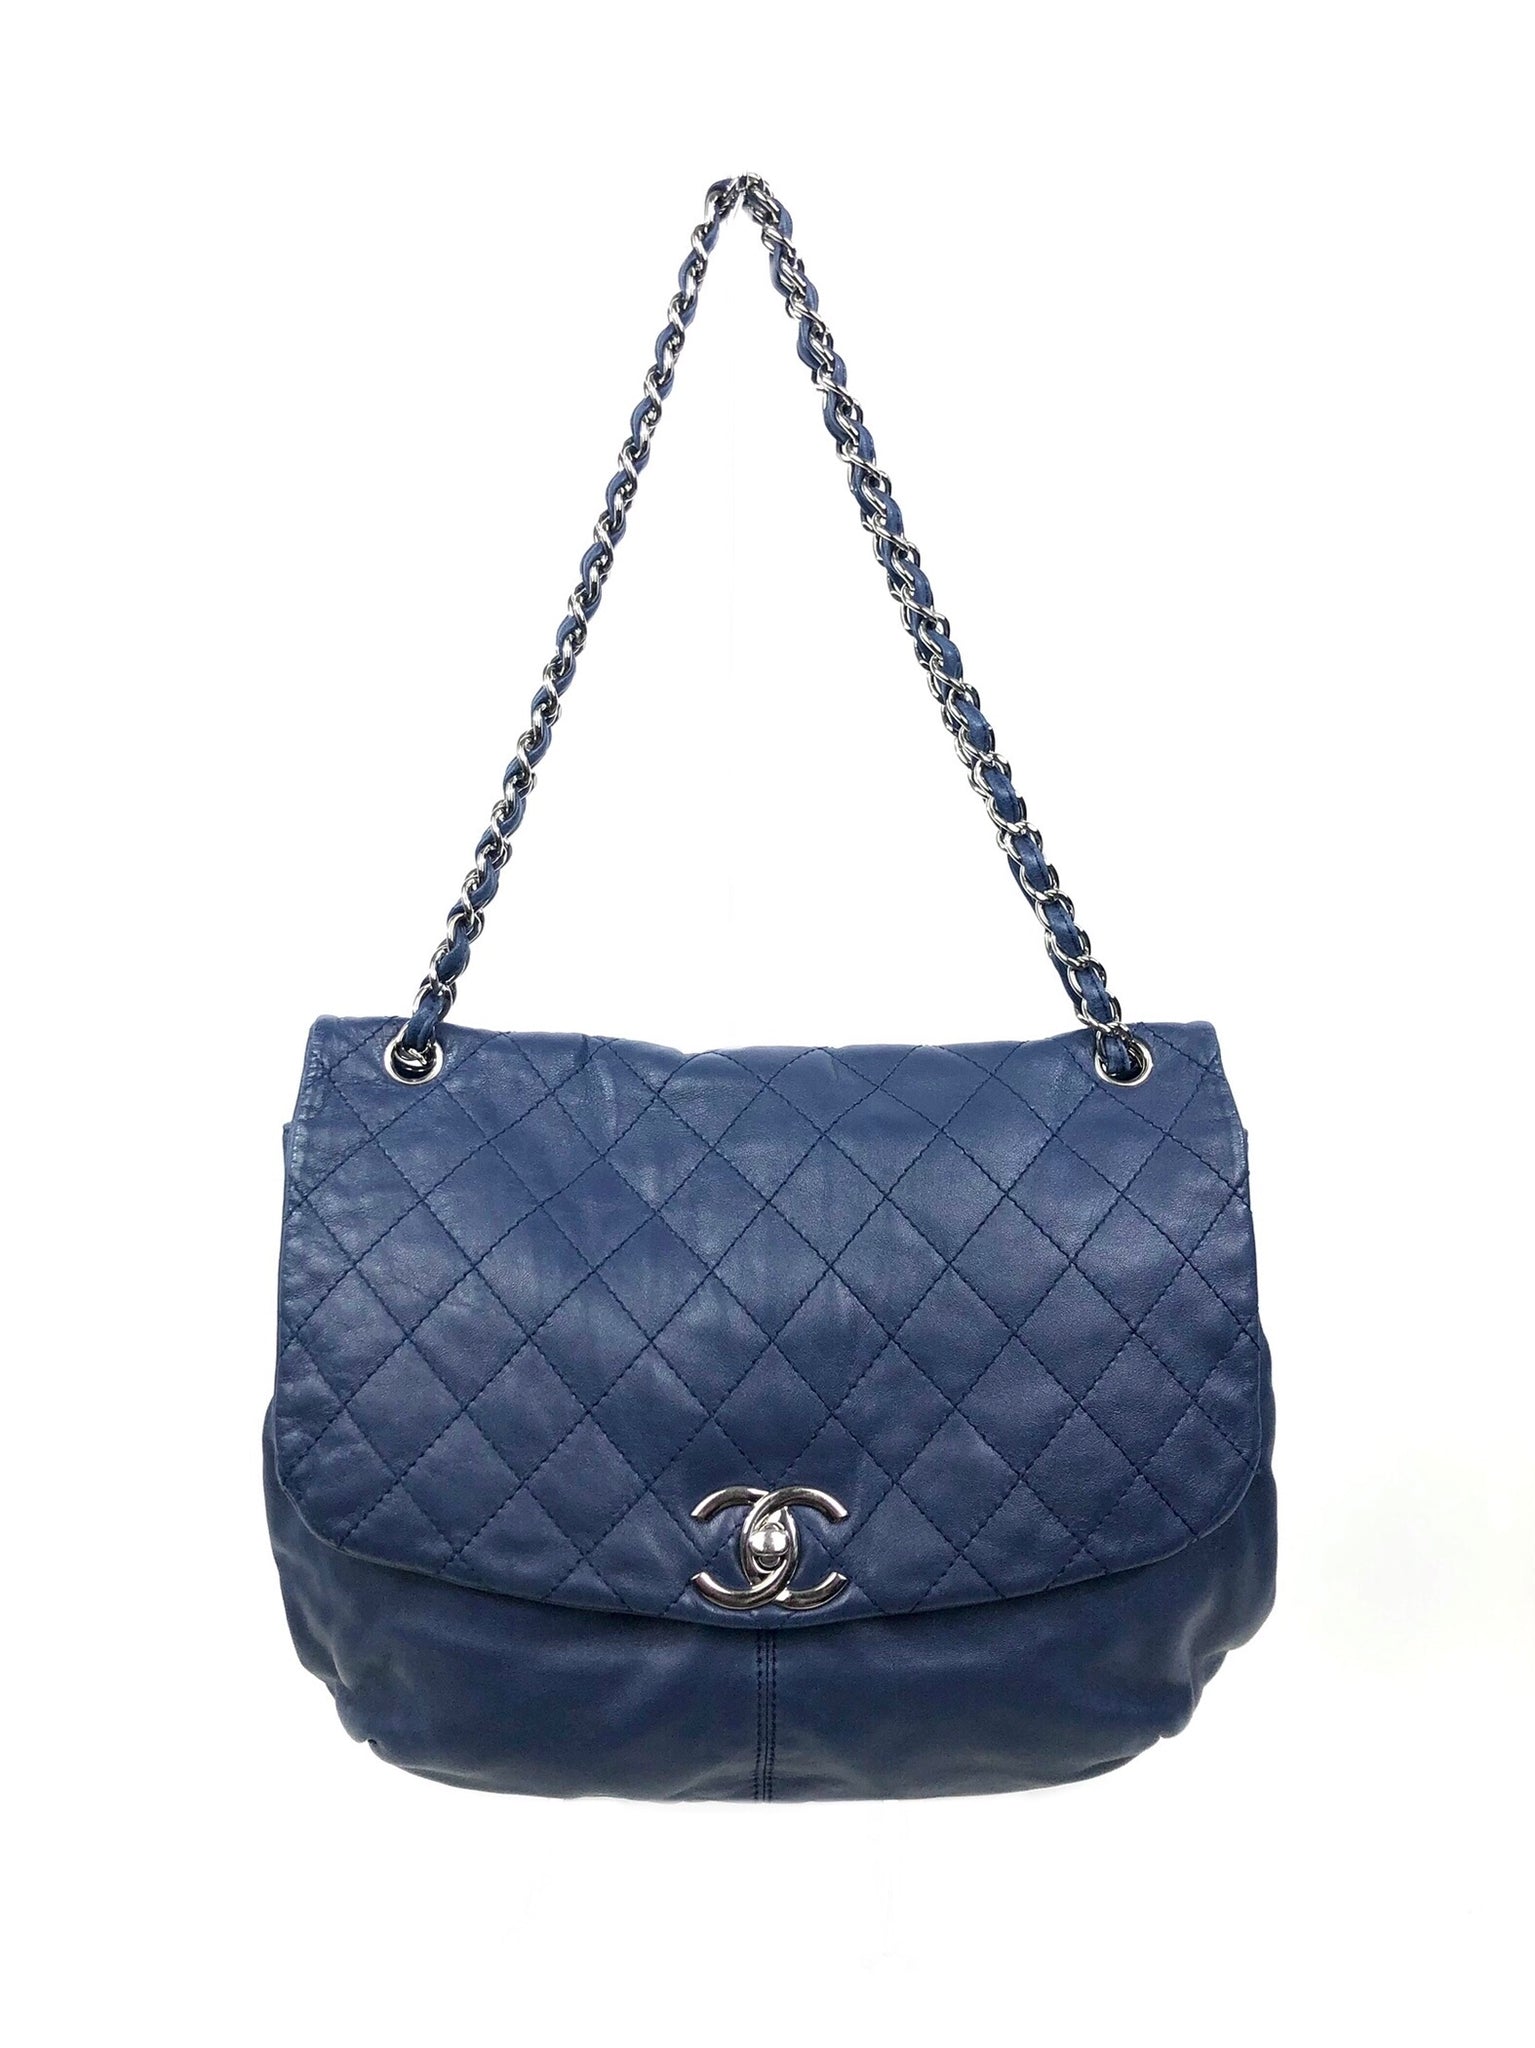 CHANEL Lambskin Quilted Large Chanel 19 Flap Light Blue